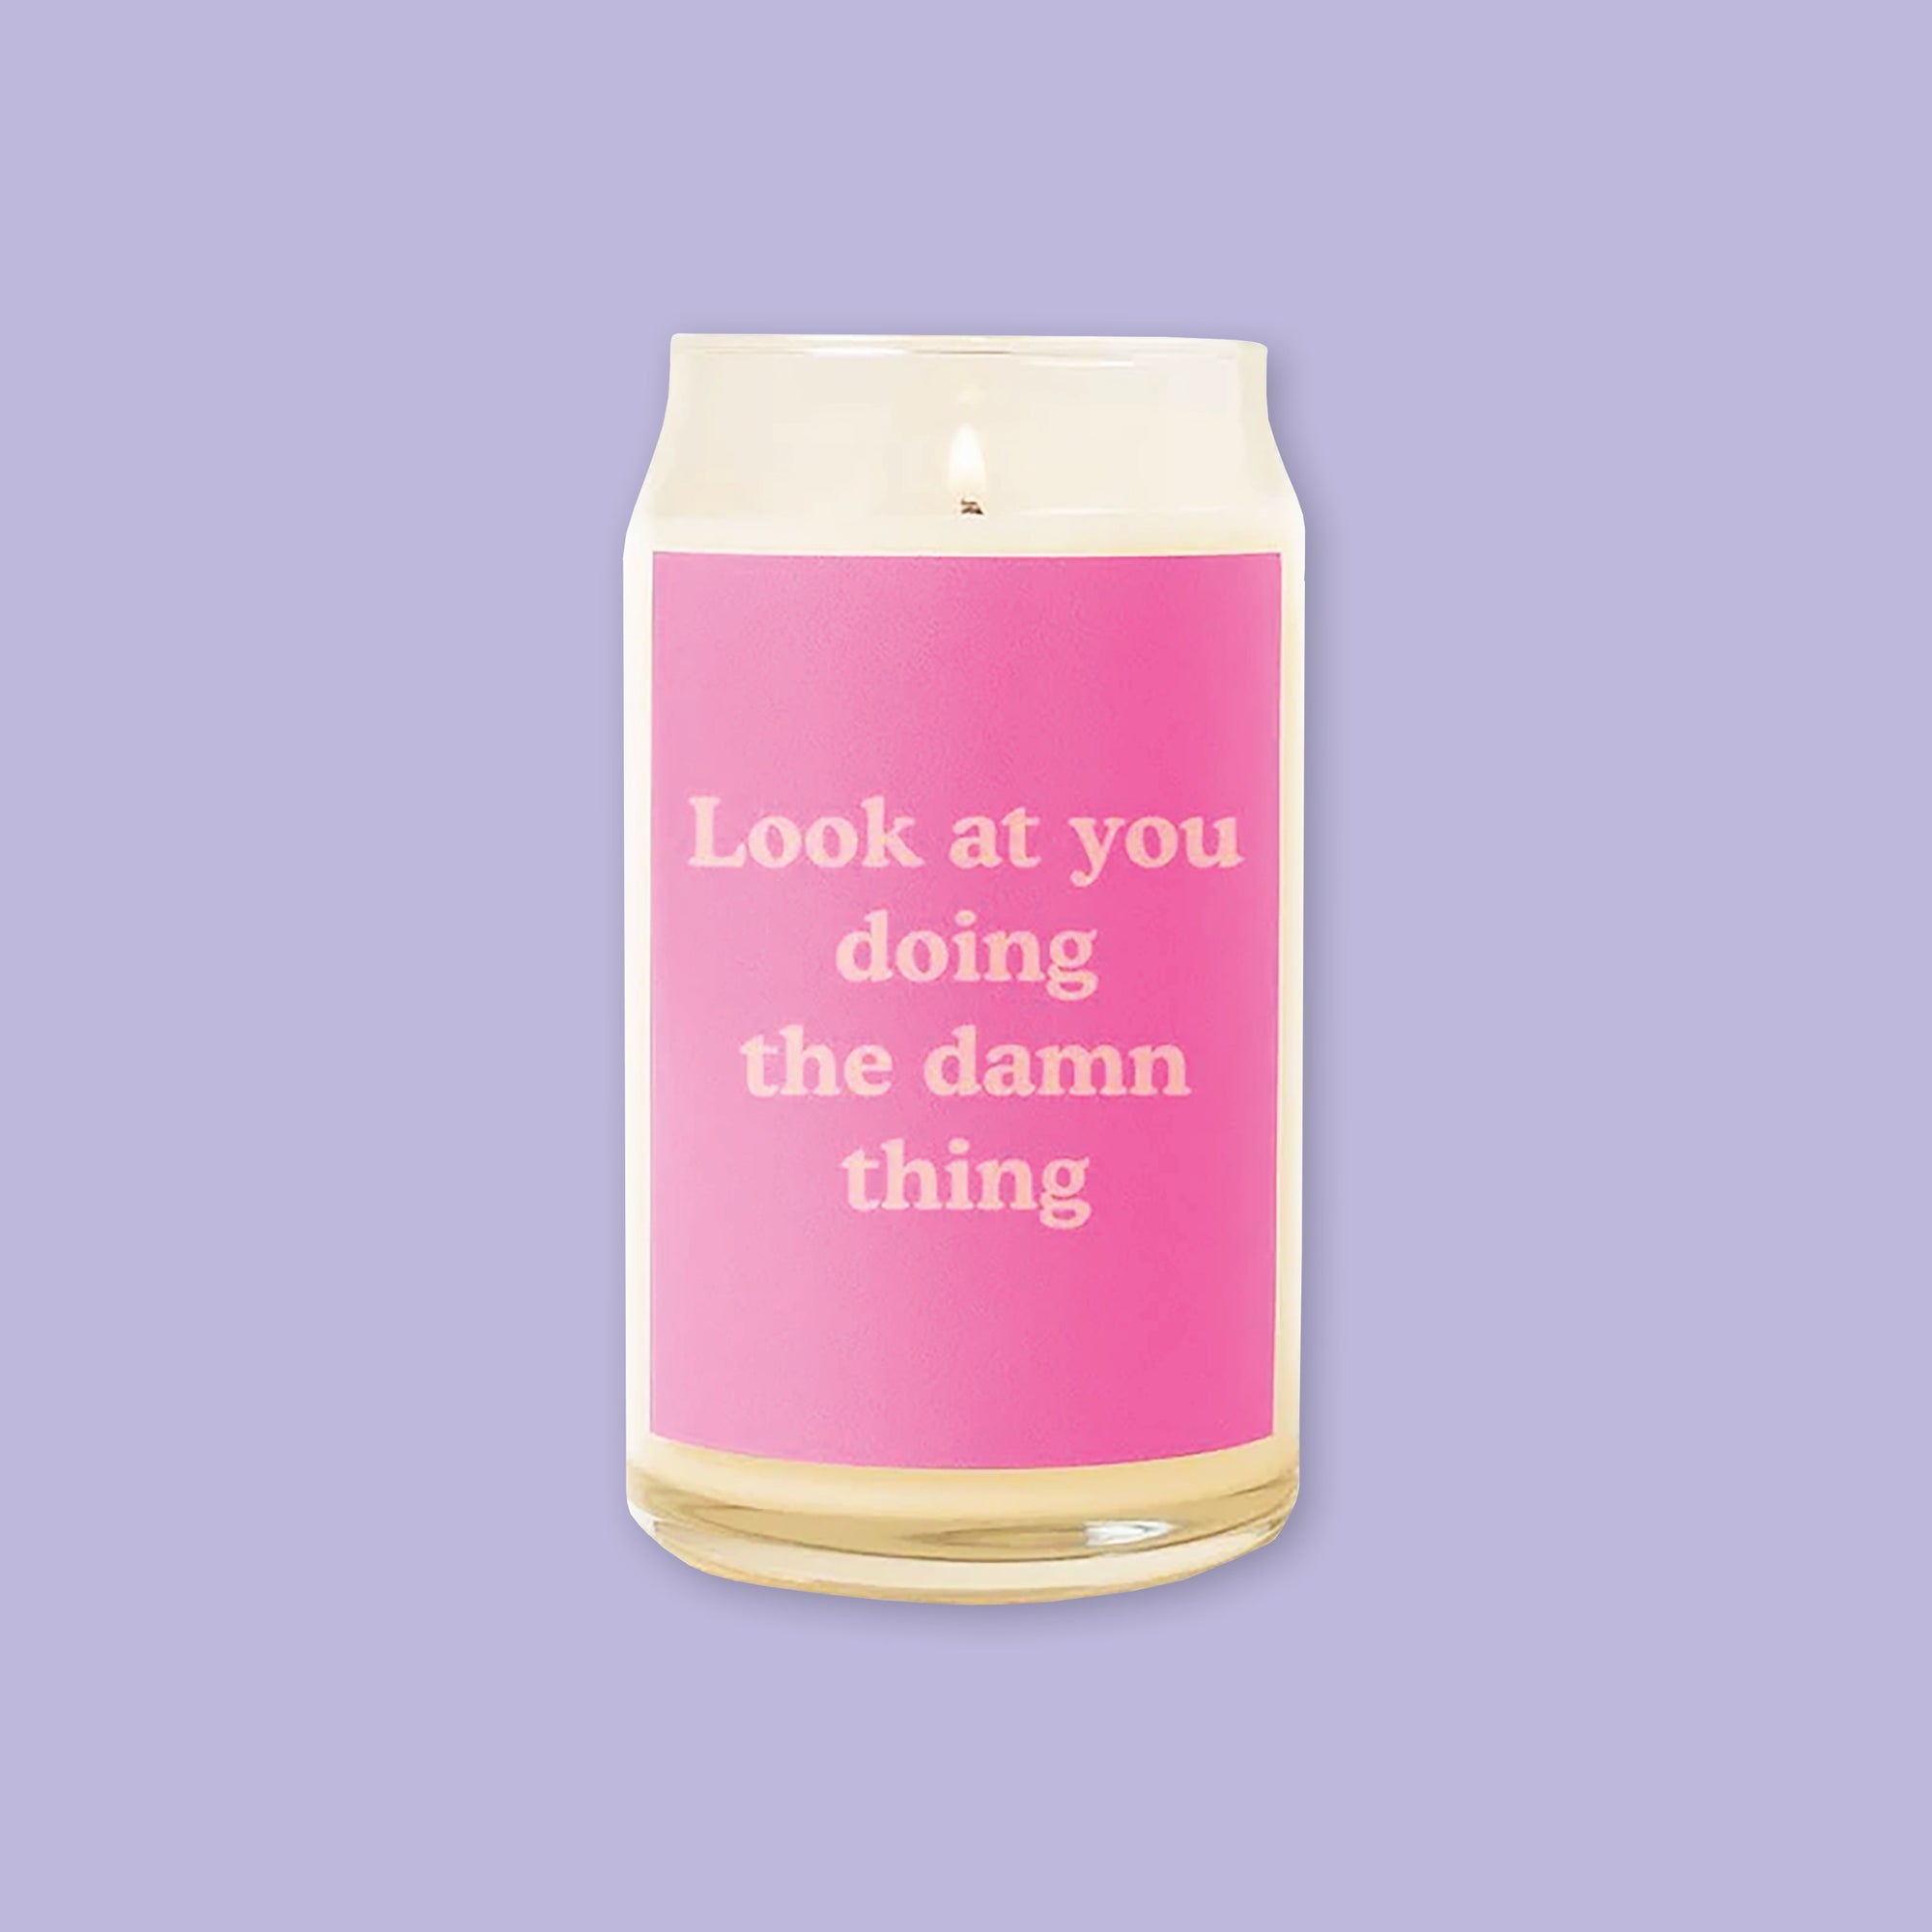 On a lavender background sits a candle. This beer can inspired glass candle is lit and has a hot pink label on the front. It says "Look at your doing the damn thing" in a coral, thick serif font.